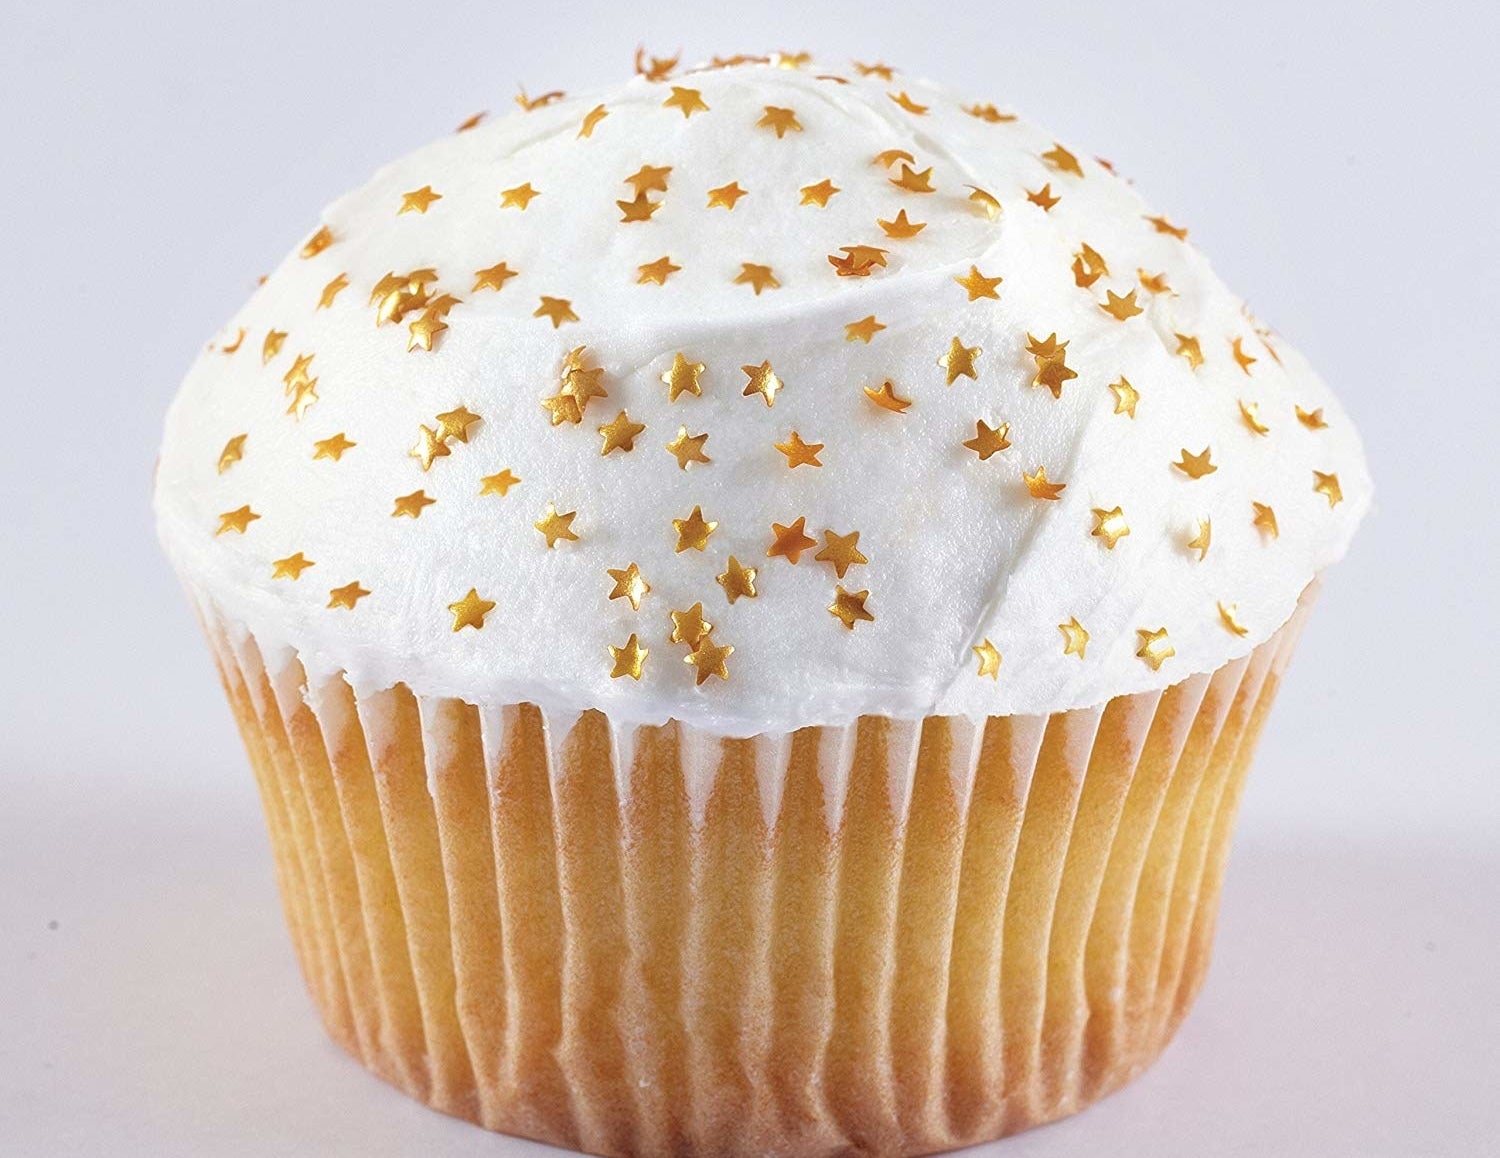 The edible gold stars on top of a cupcake